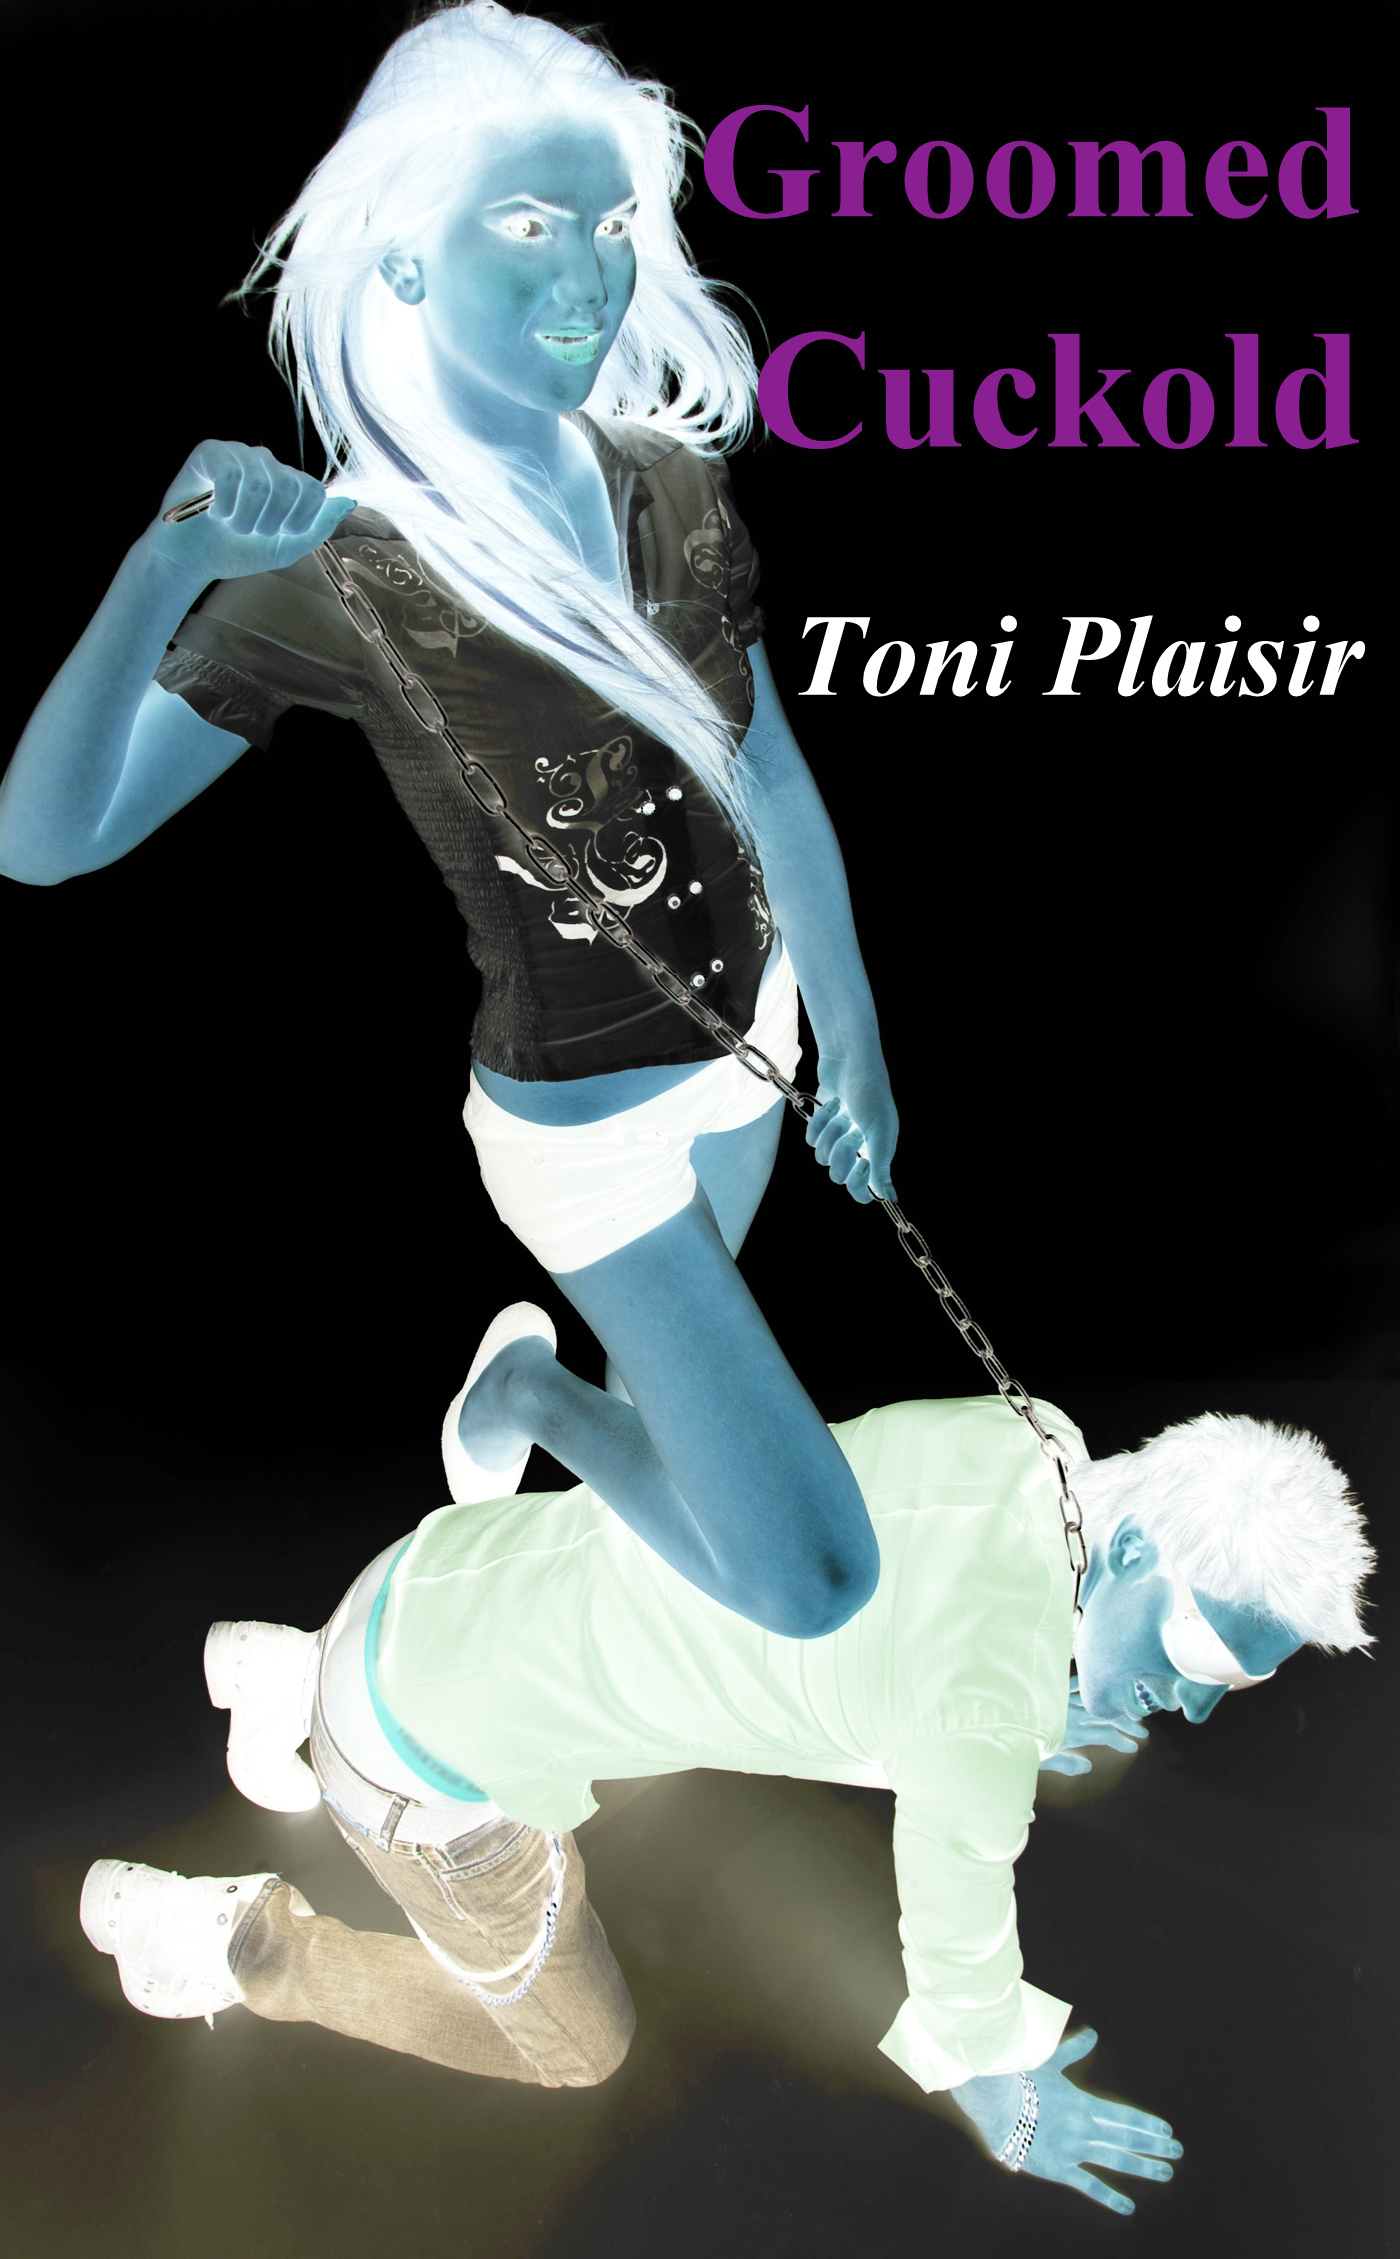 Groomed Cuckold, by Toni Plaisir